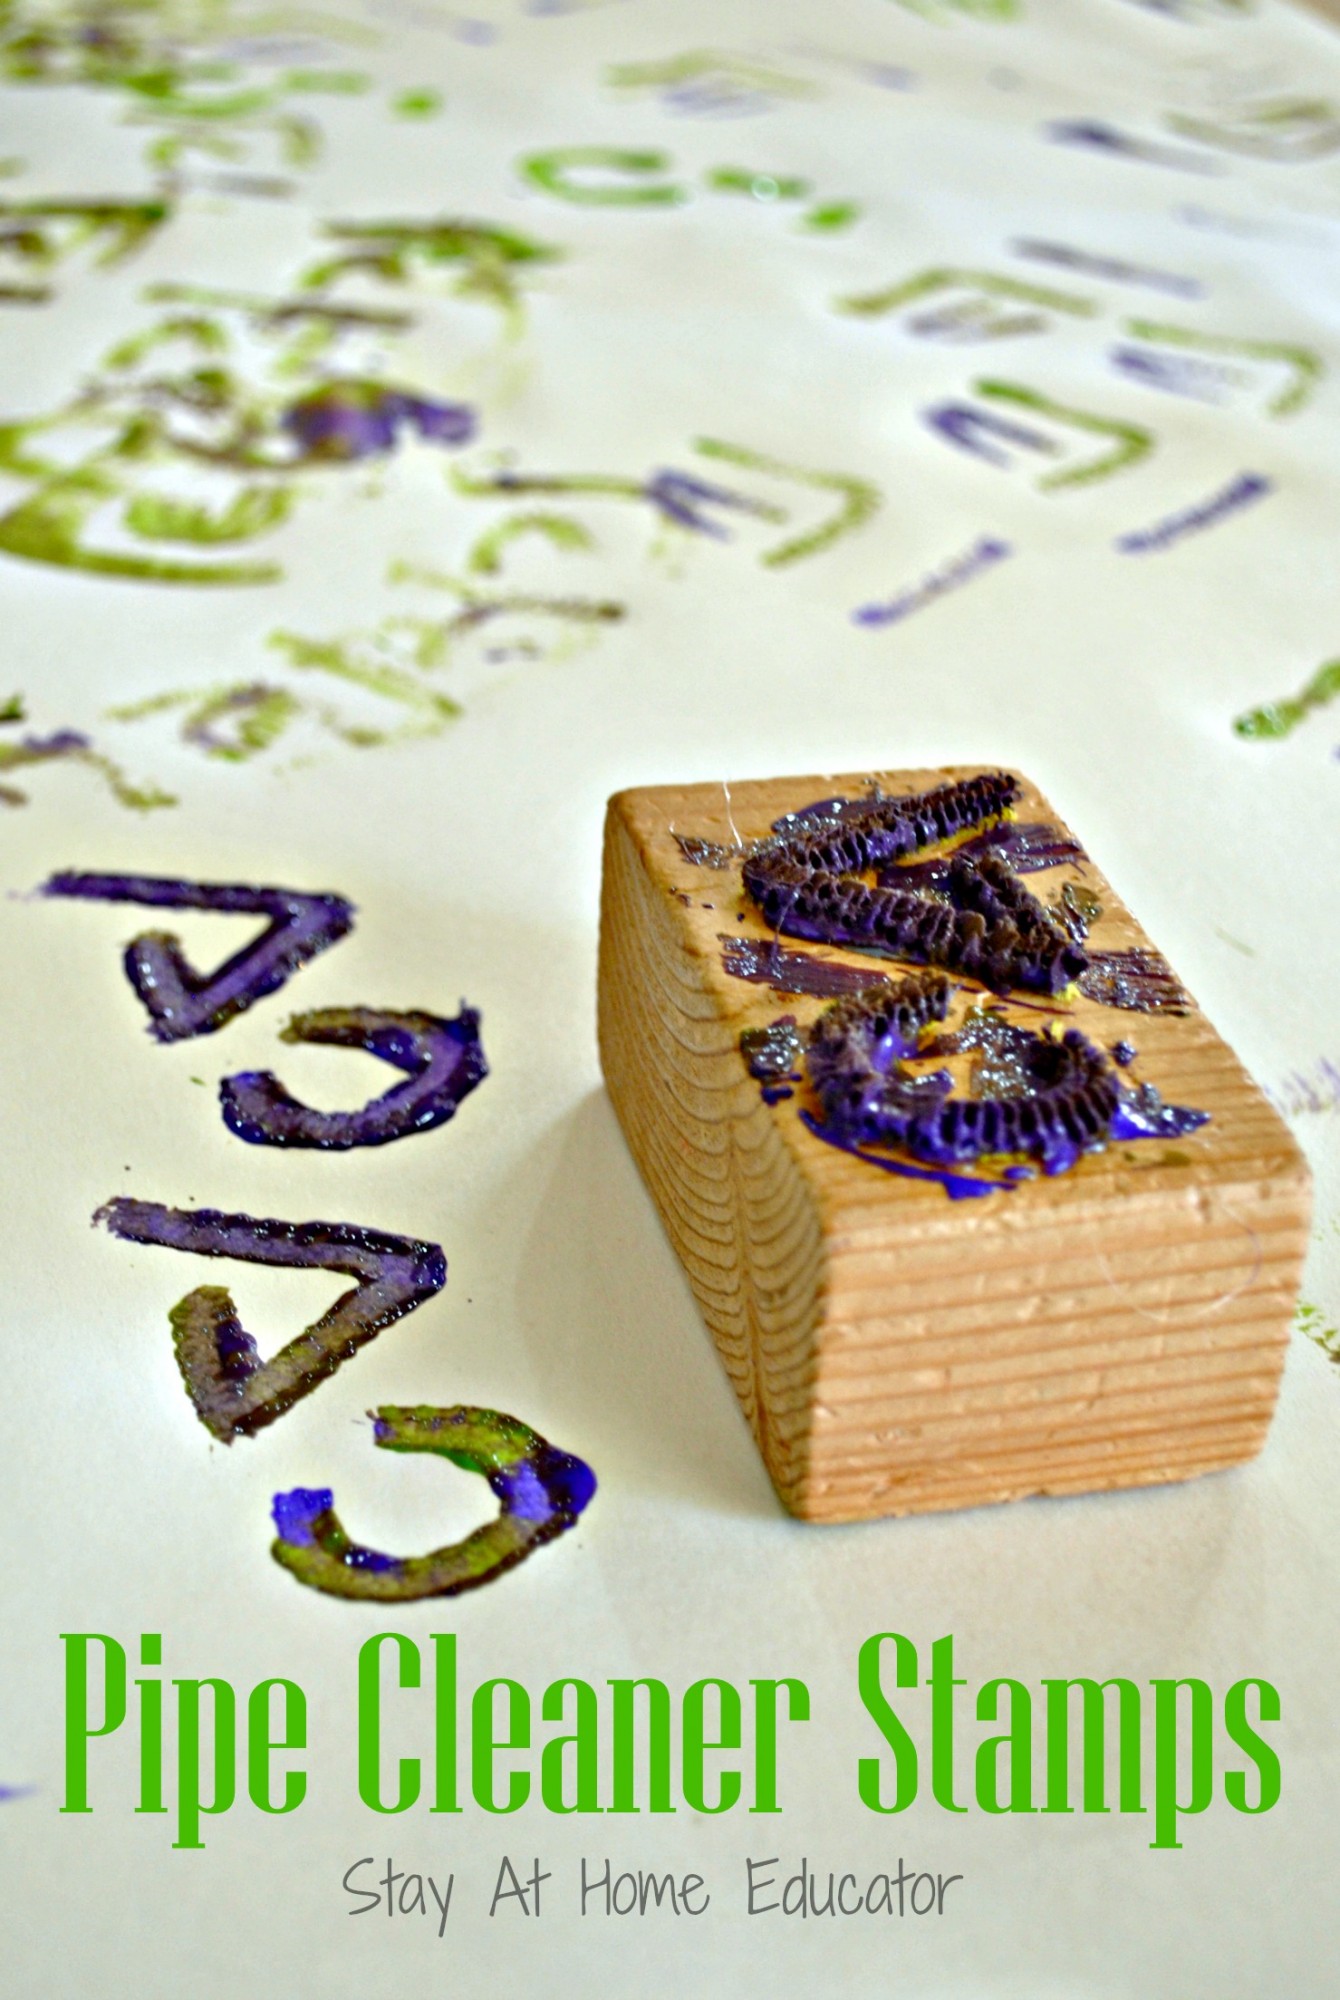 Pipe cleaner stamps - Stay At Home Educator